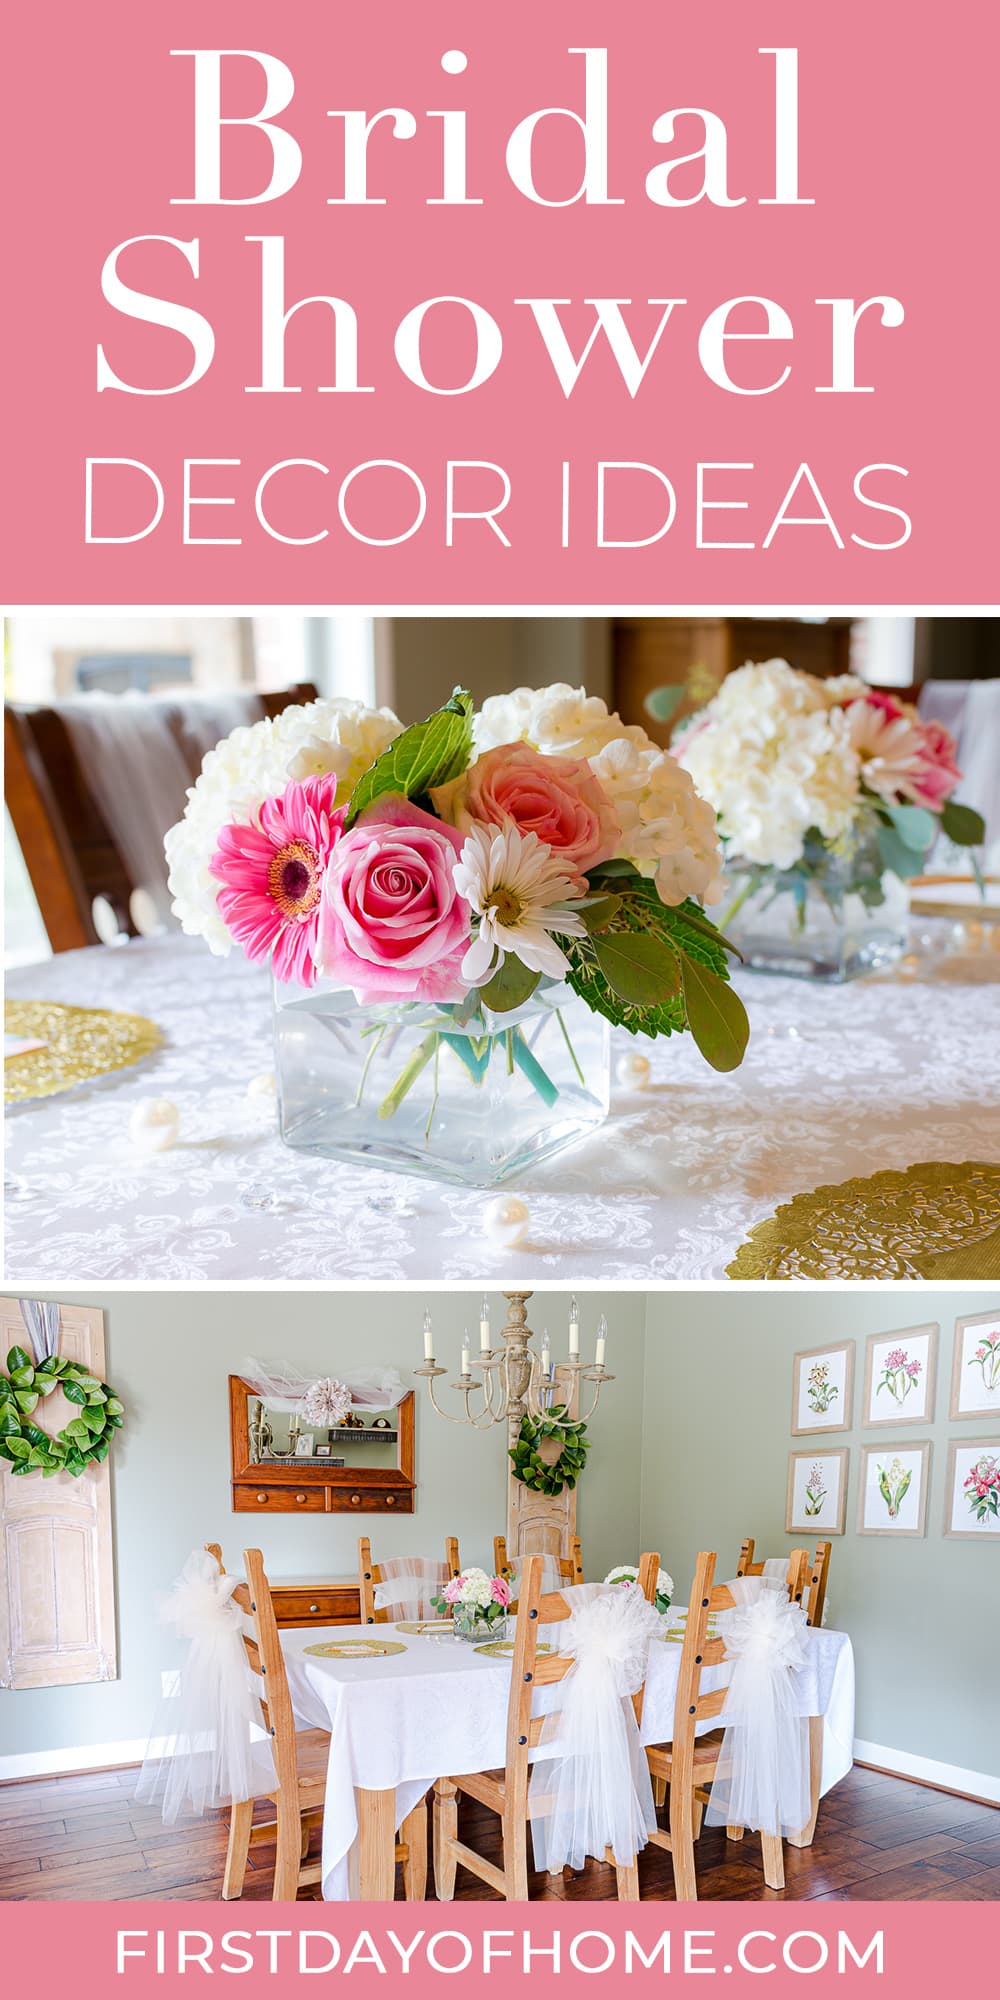 Collage of bridal shower decor ideas with text overlay reading "Bridal Shower Decor Ideas"